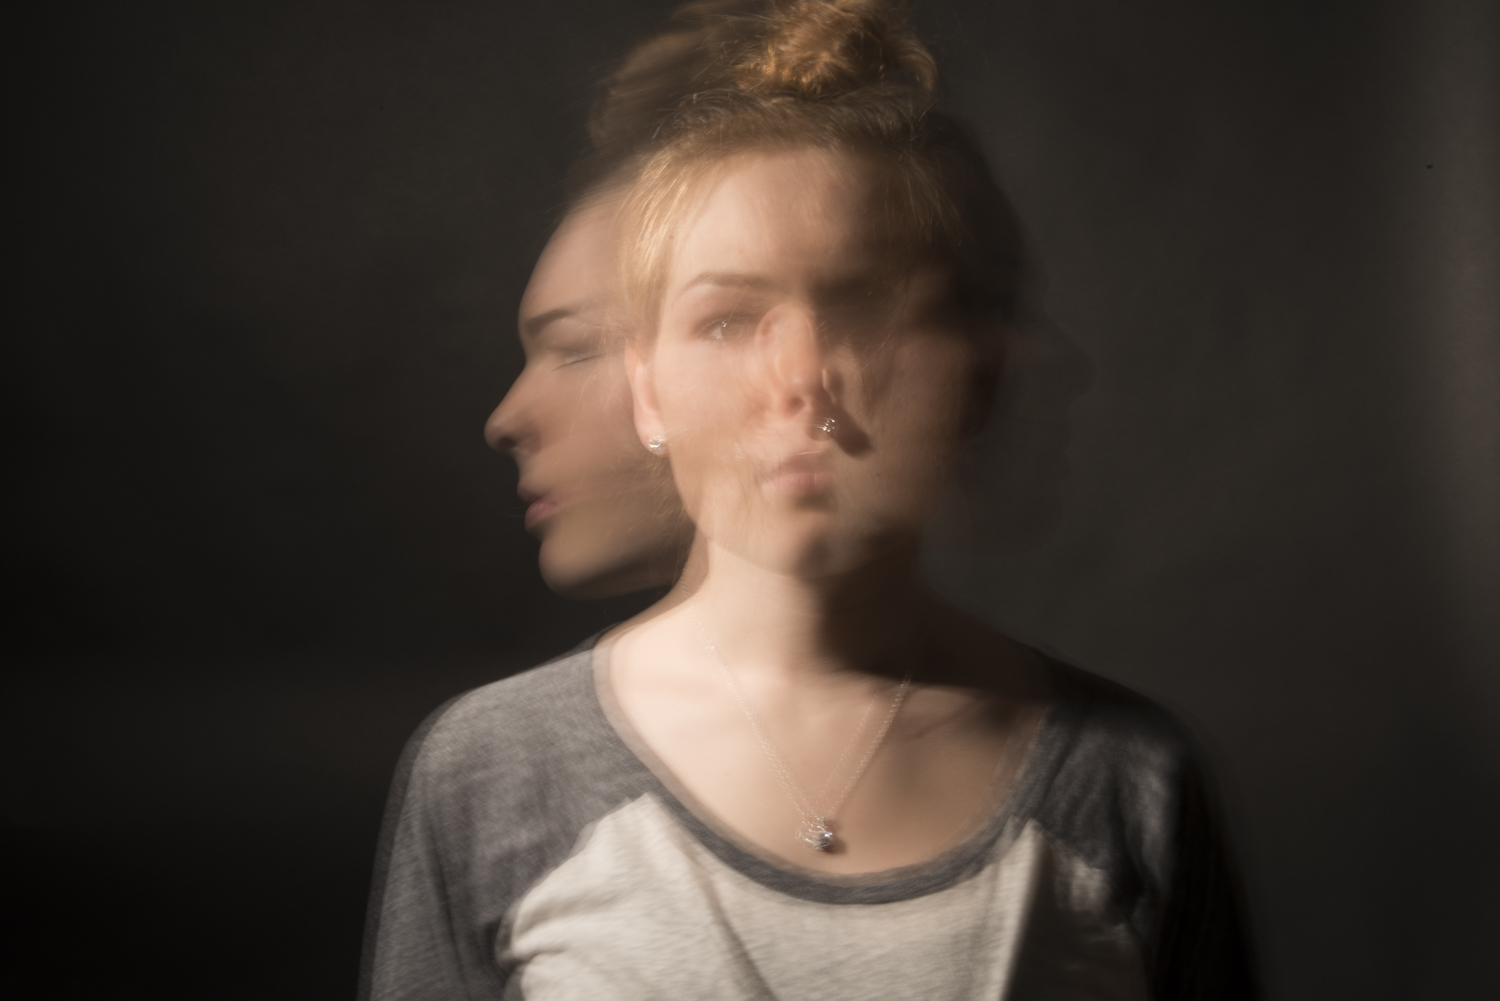 For people with depersonalization it often feels as if you’re watching your...